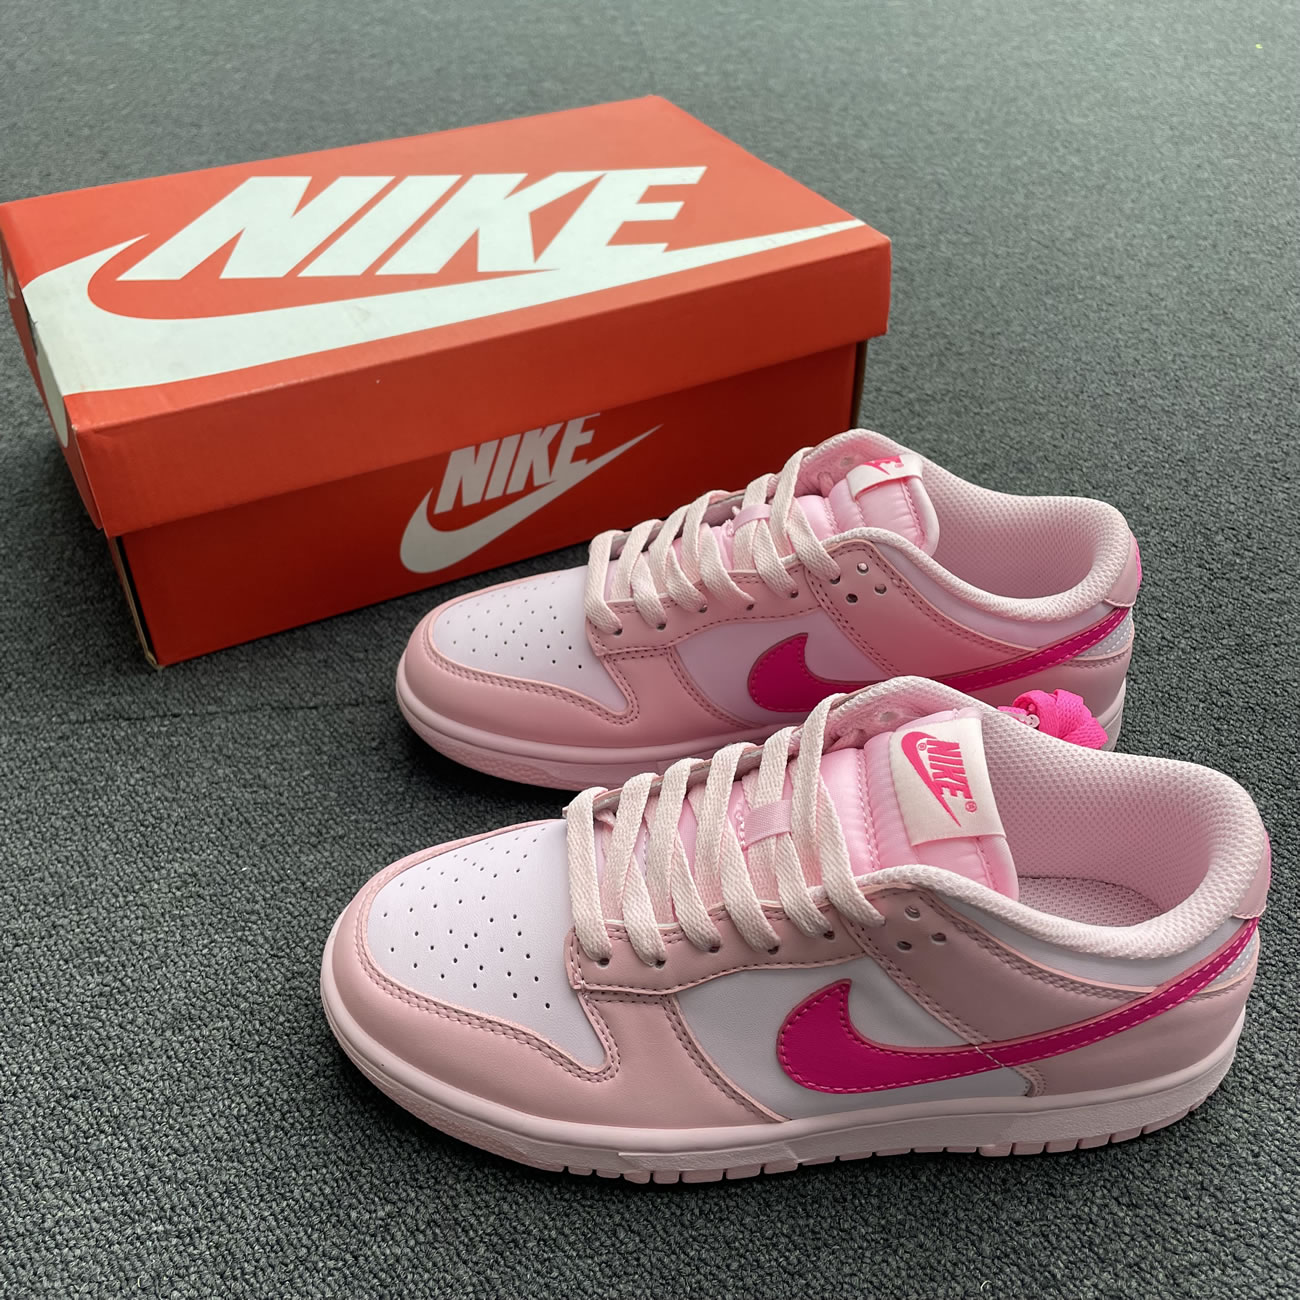 Nike Dunk Low Triple Pink Gs Dh9765 600 (7) - newkick.org